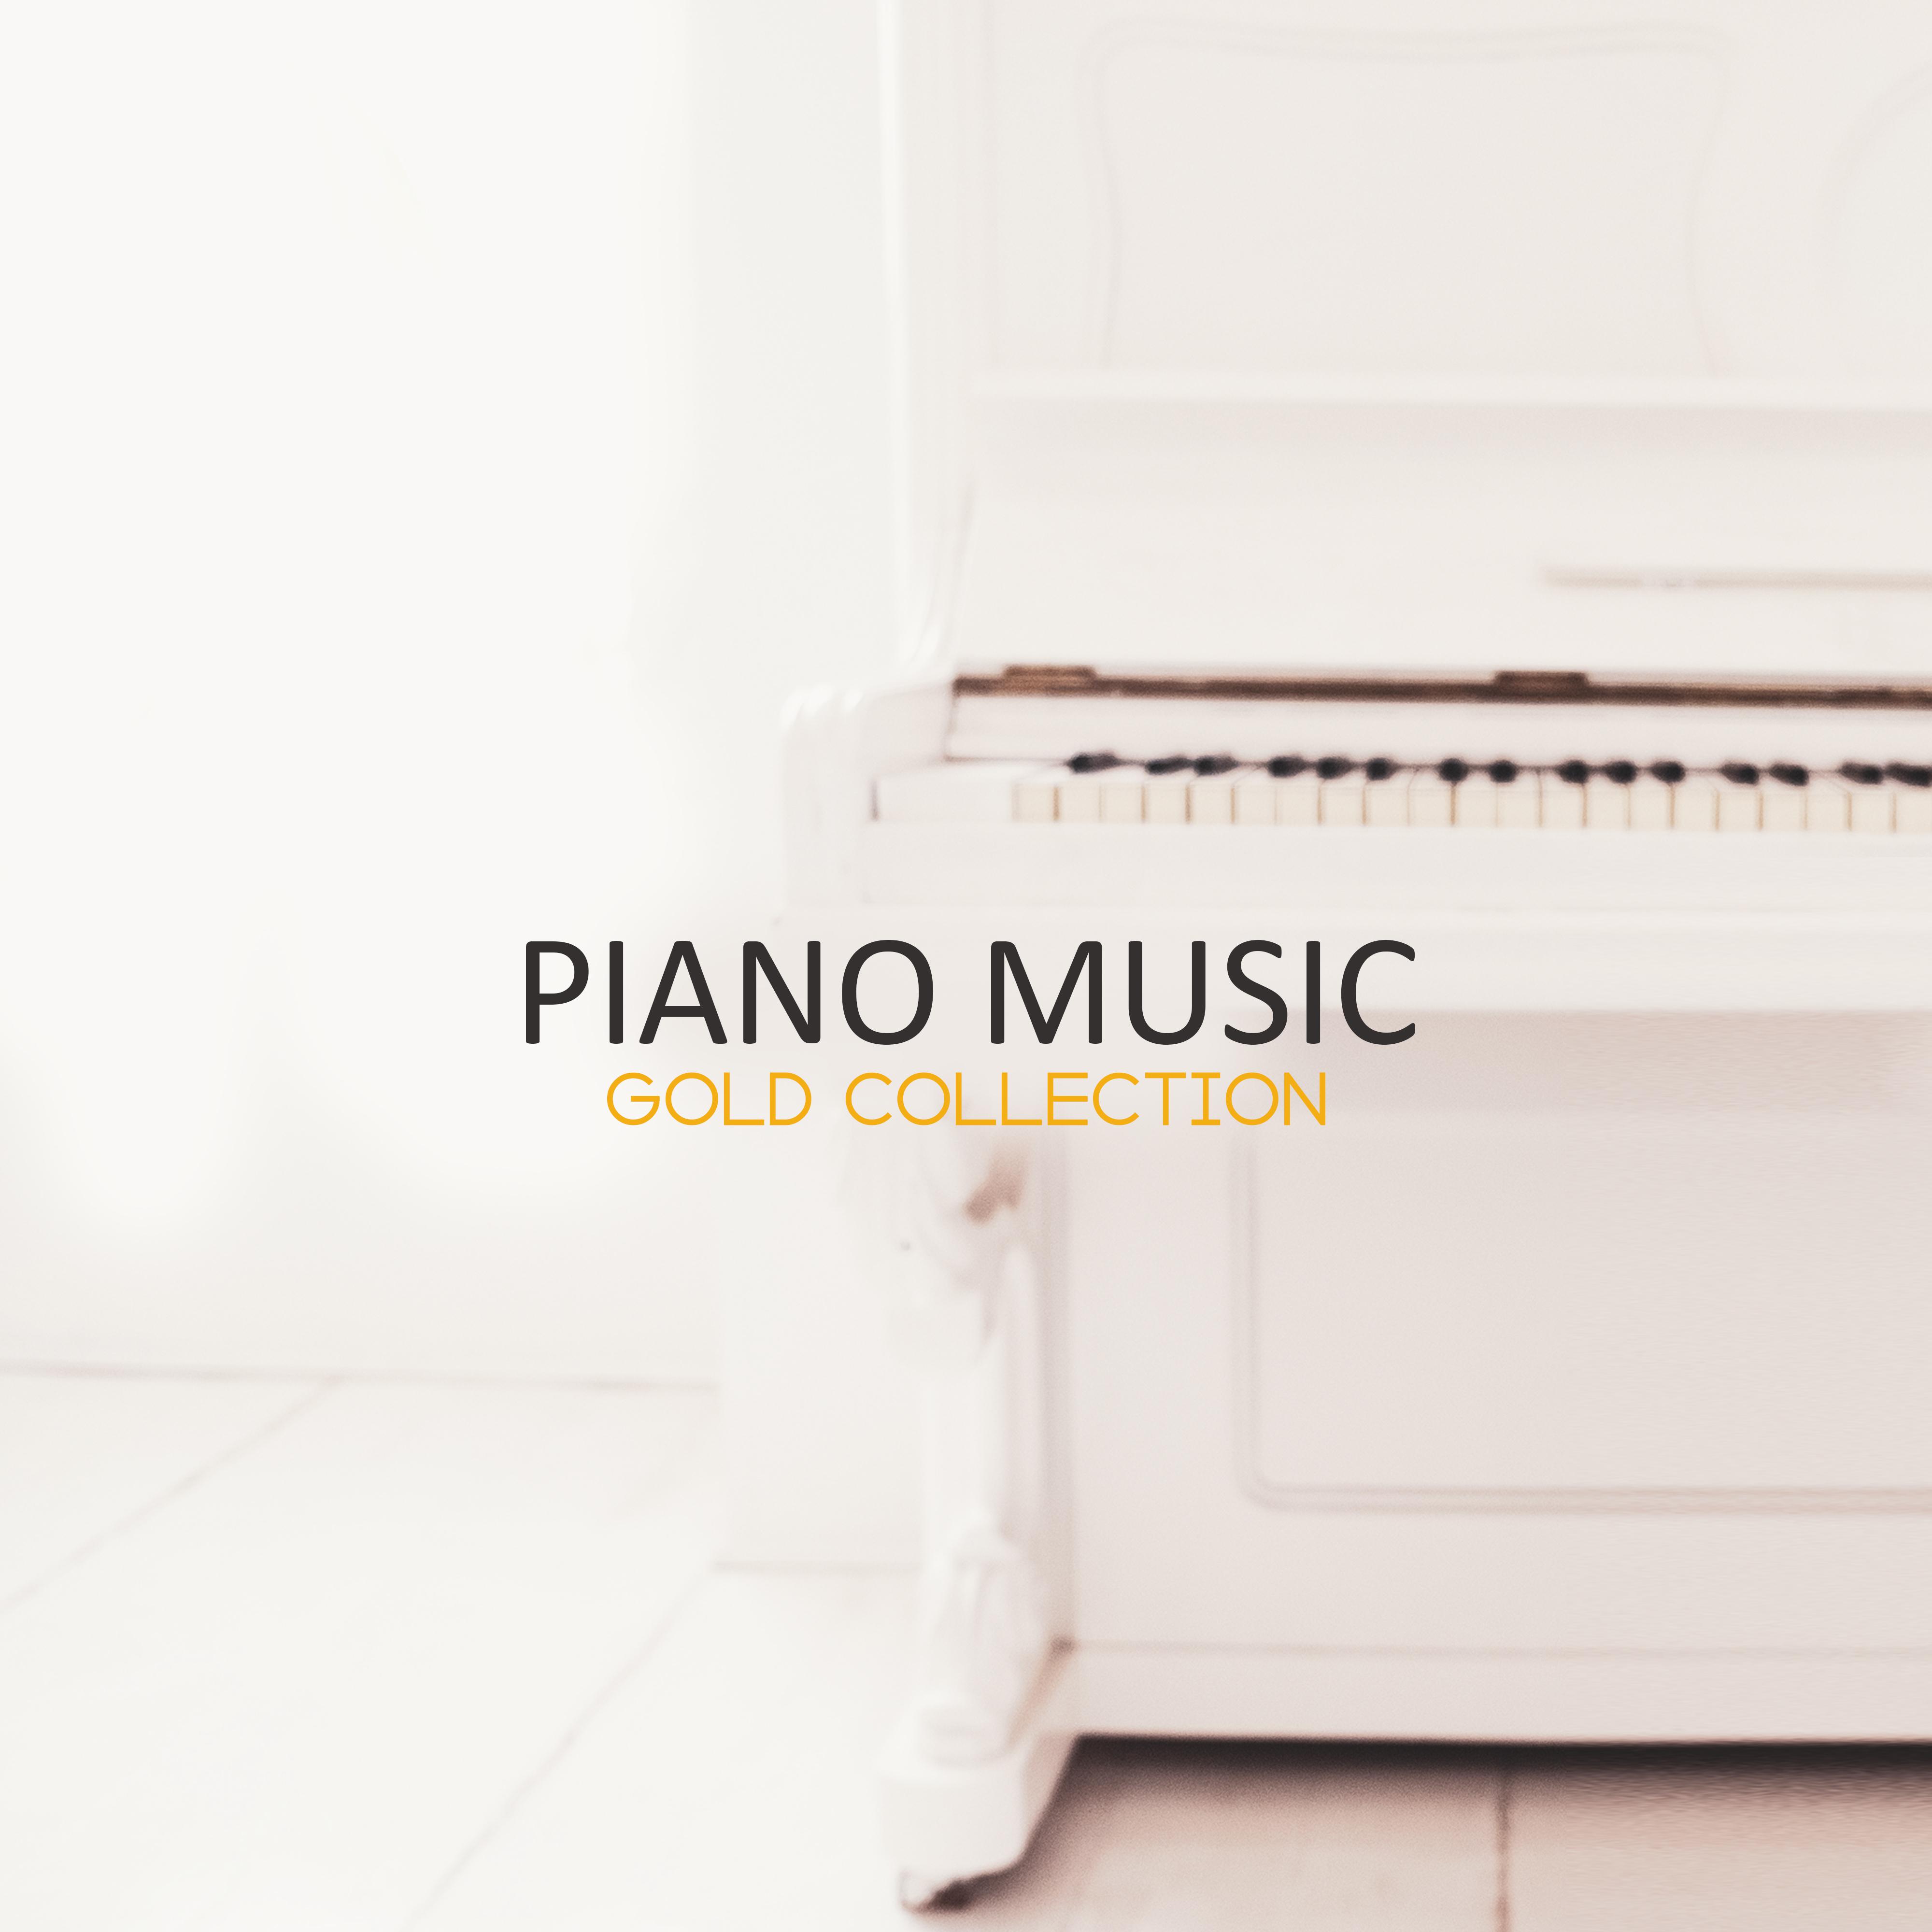 Piano Music Gold Collection  2019 Most Beautiful Piano Melodies for Many Occasions, Soft Background for Restaurant or Cafe, Relaxation After Tough Day, Calming Down, Romantic Evening with Love